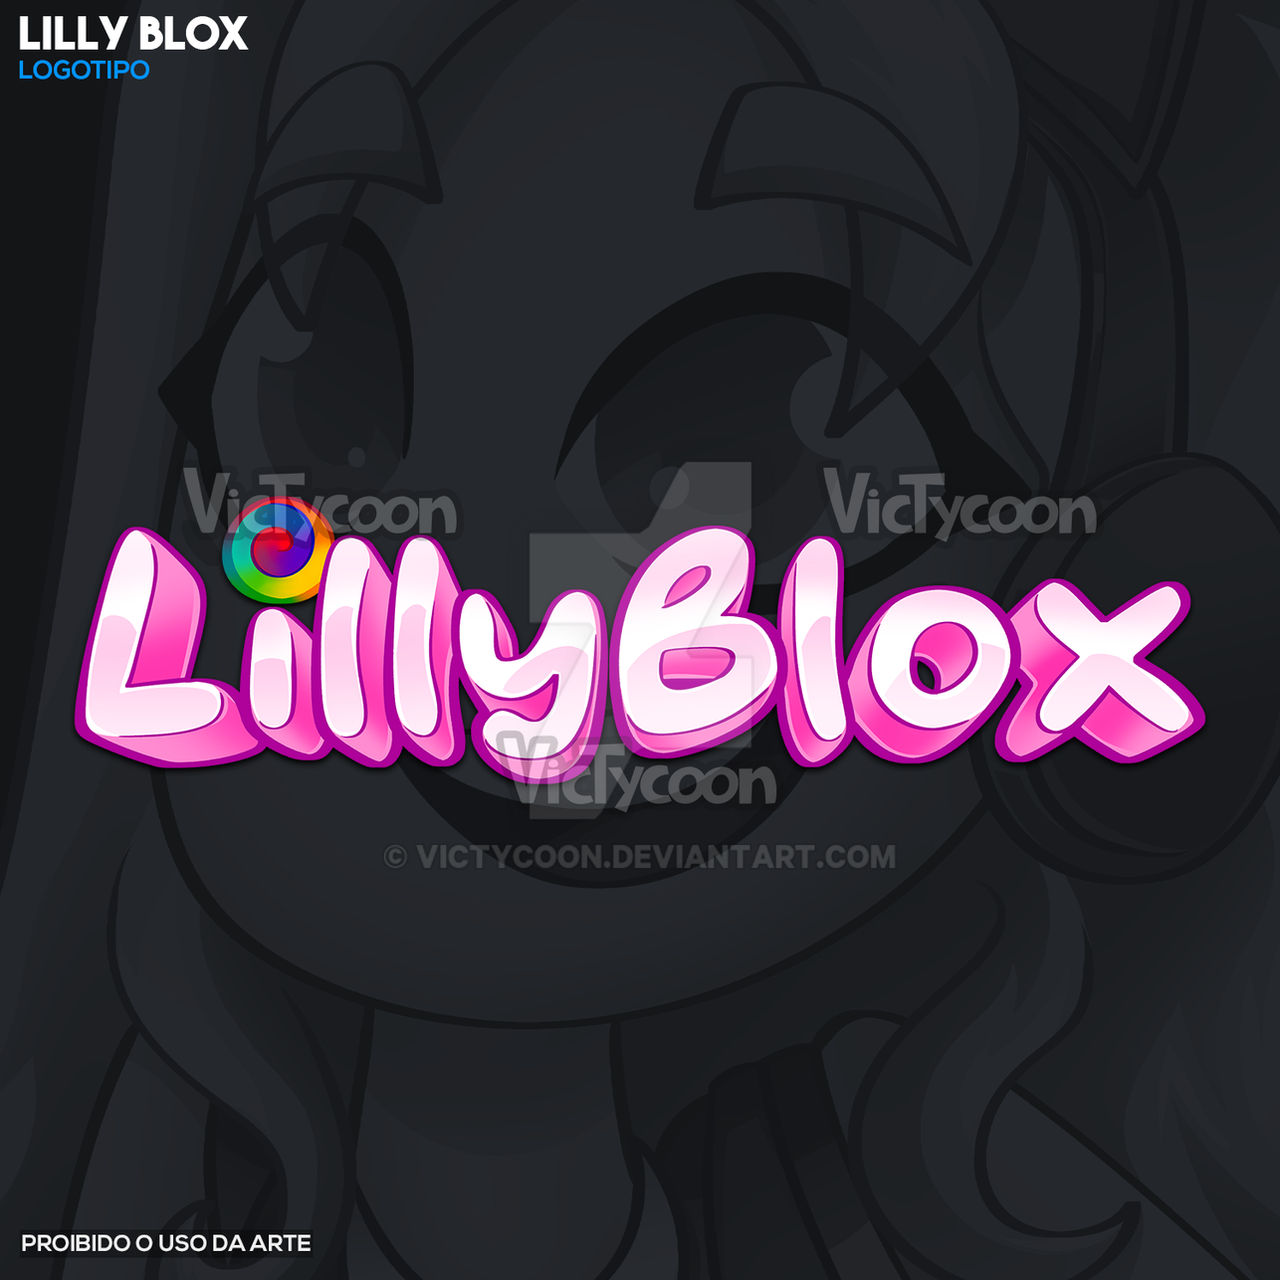 LOGO - Lokis (Canal  Infantil Roblox) by VicTycoon on DeviantArt